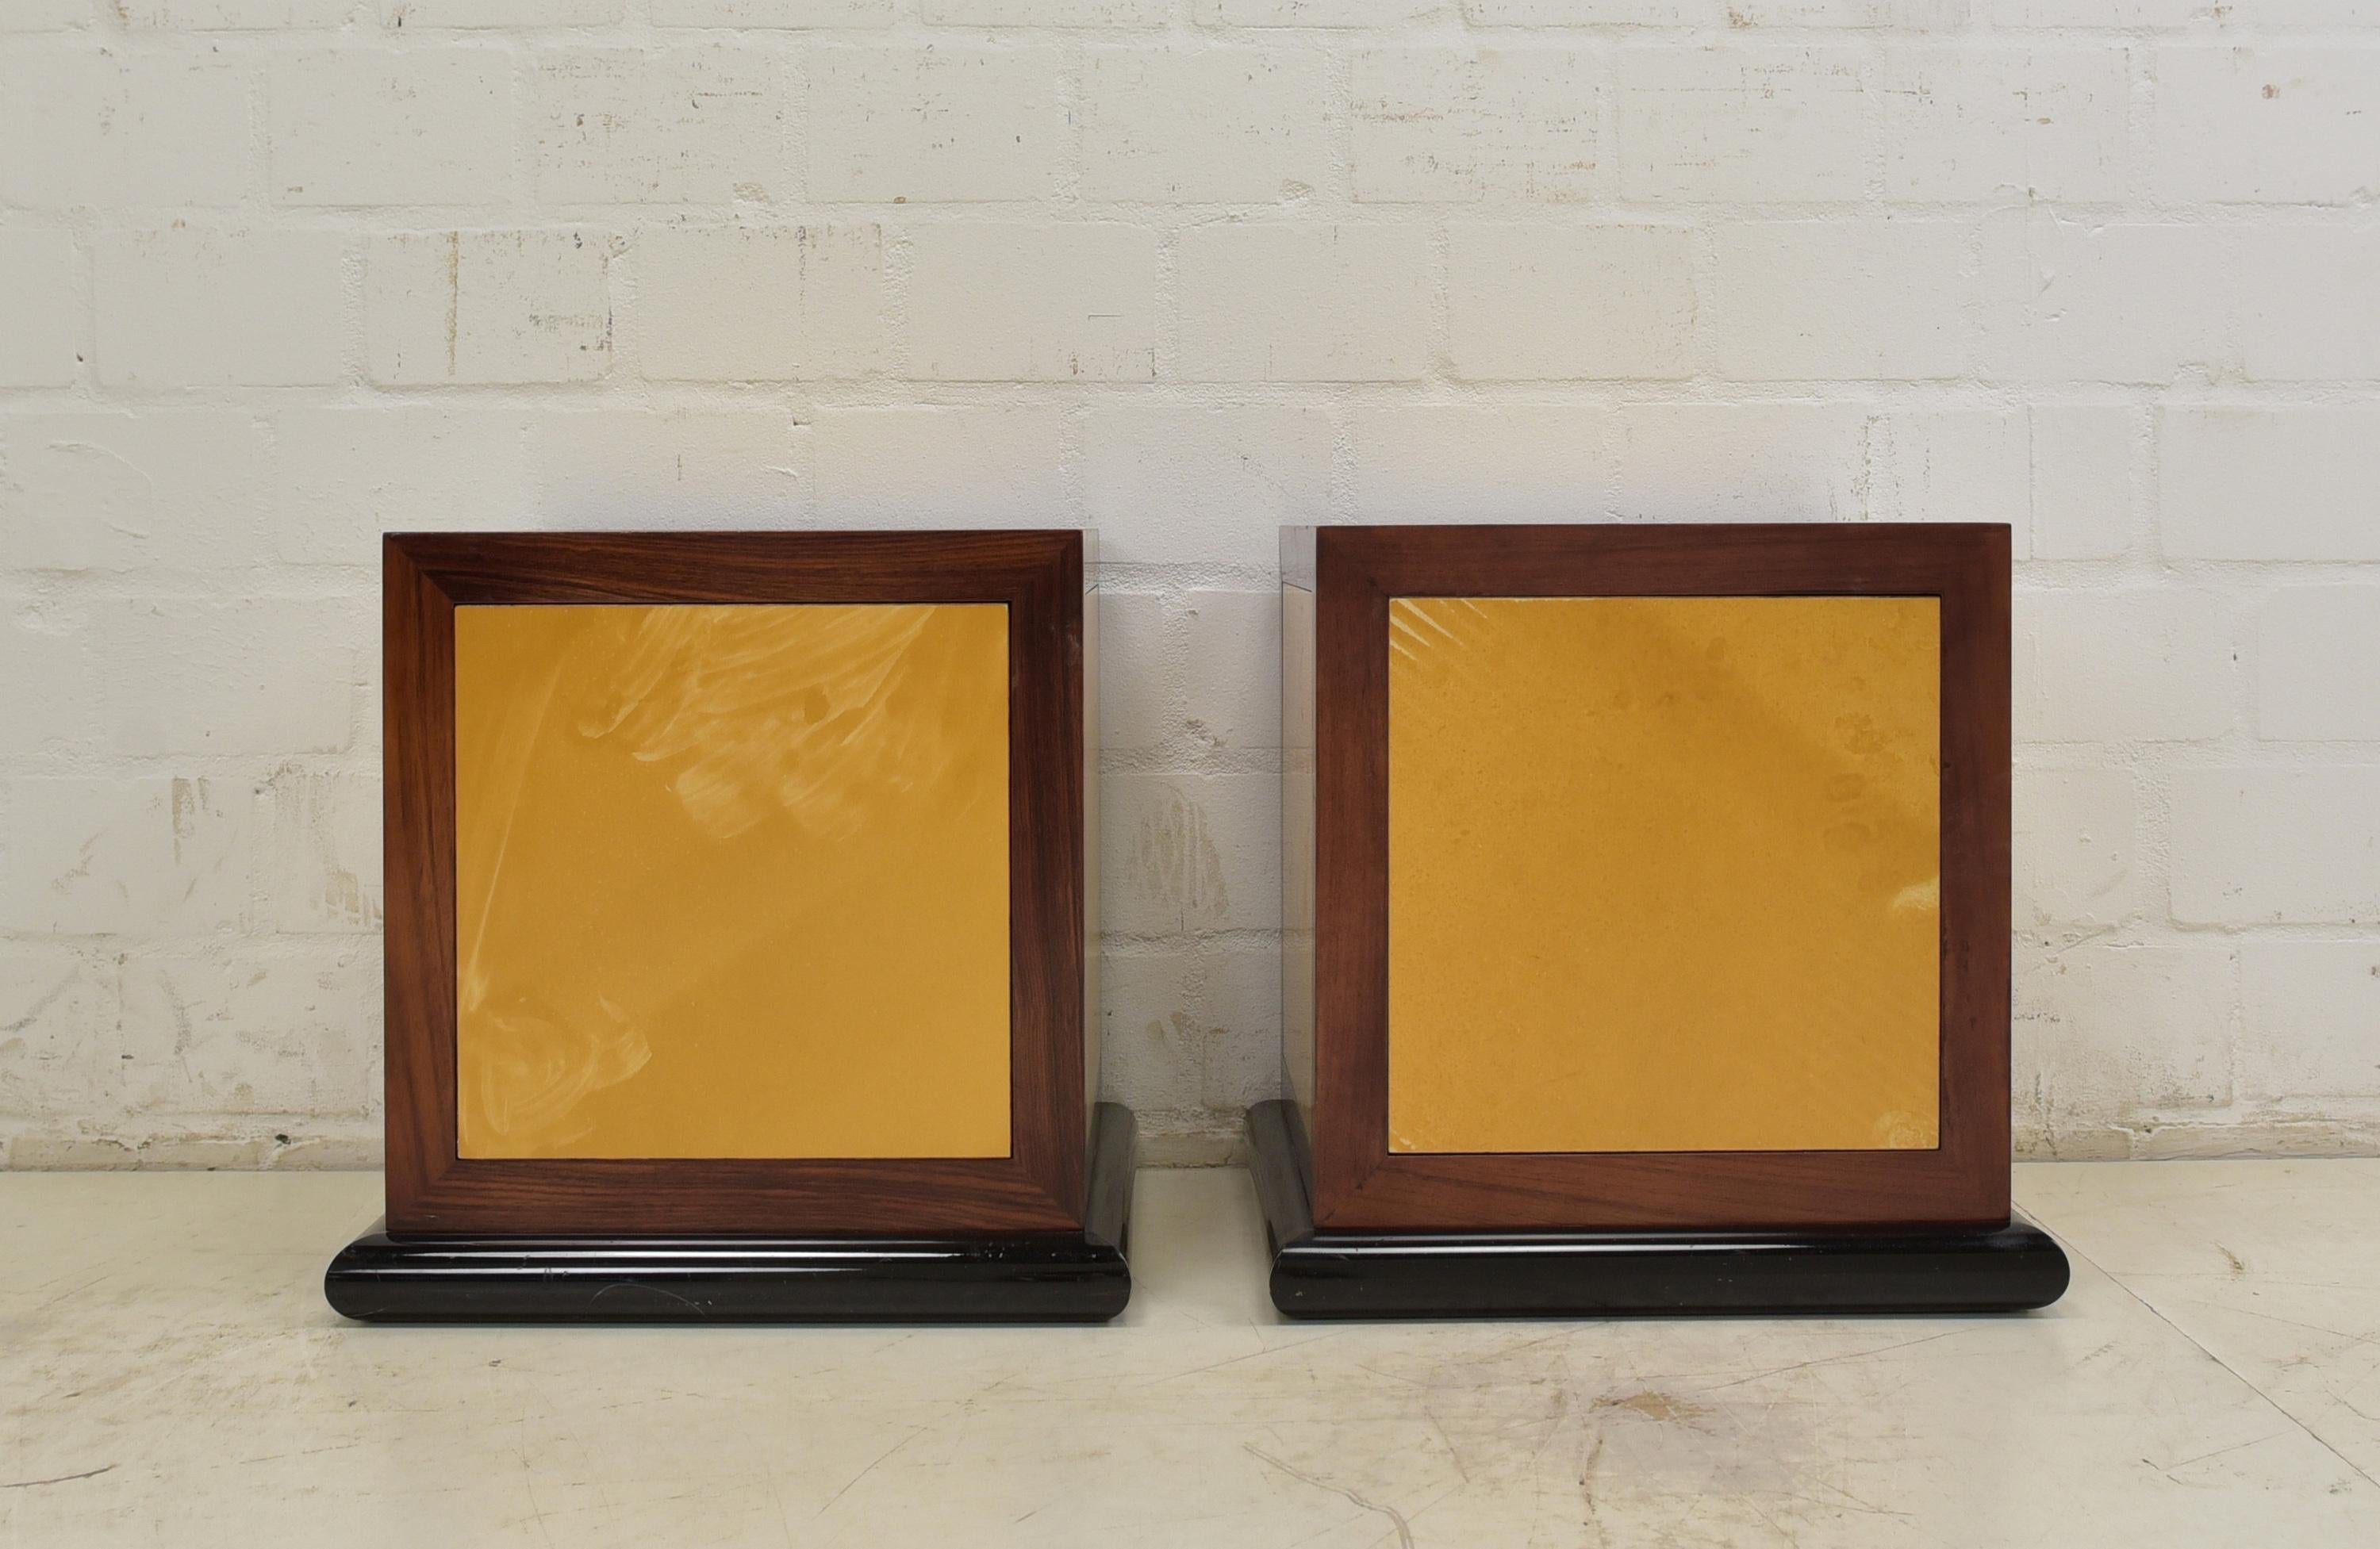 Pair of bedside tables Cube design retro 80s 90s vintage

Features:
Solid rosewood frame dice with yellow panels on a tubular metal base
One invisible door with pressure lock
High quality
Very nice design

Additional information:
Material: